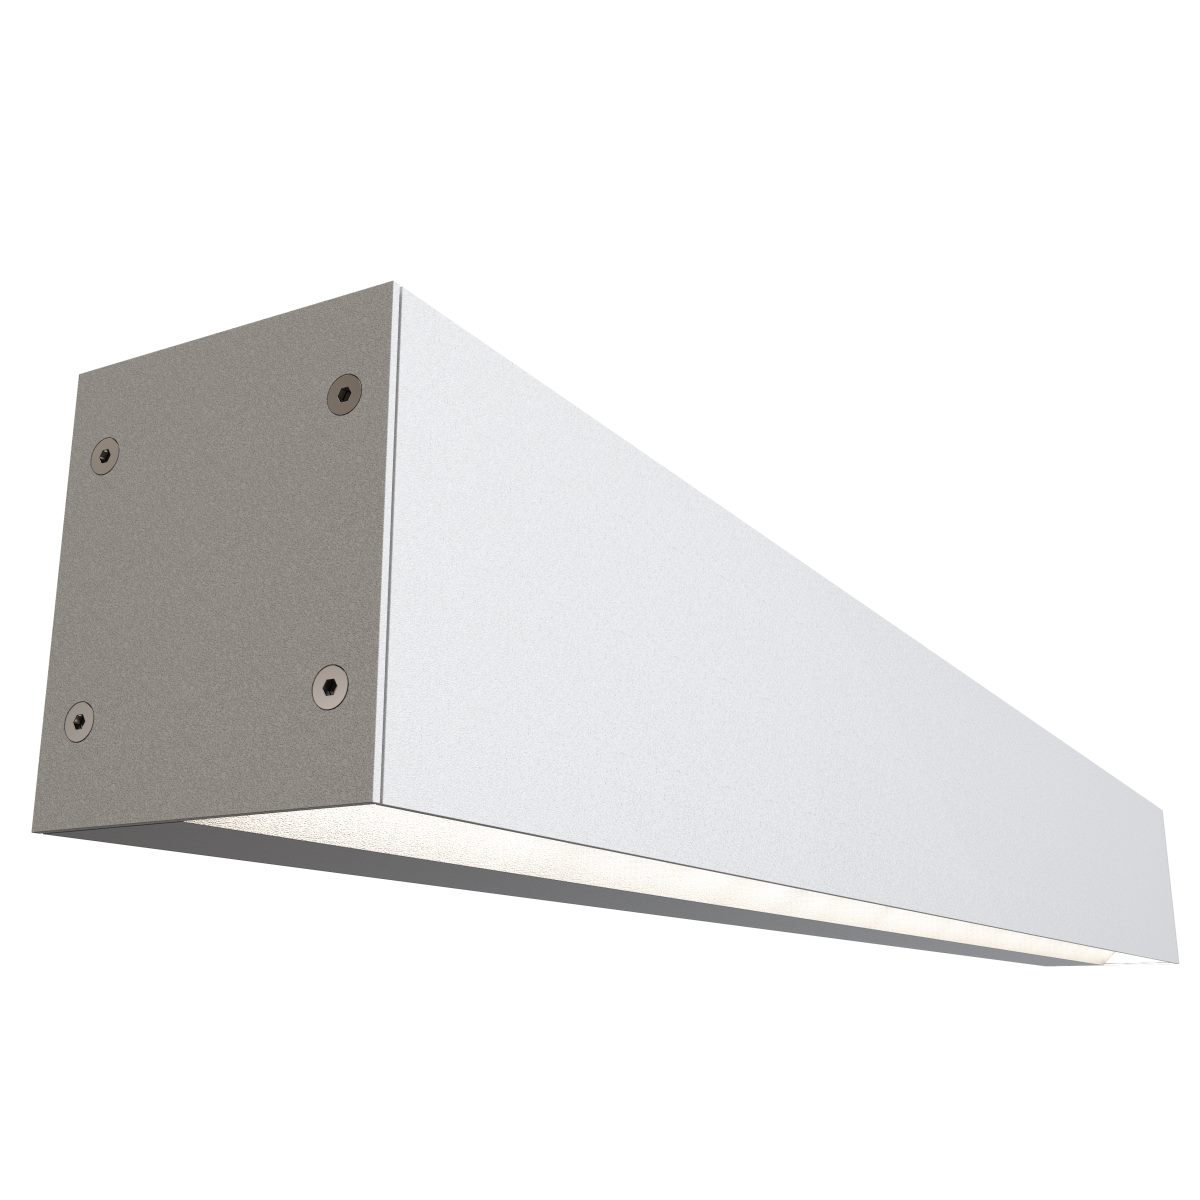 design for the people IP S16 Spiegelleuchte weiss LED 450-650lm up-down 59-5cm